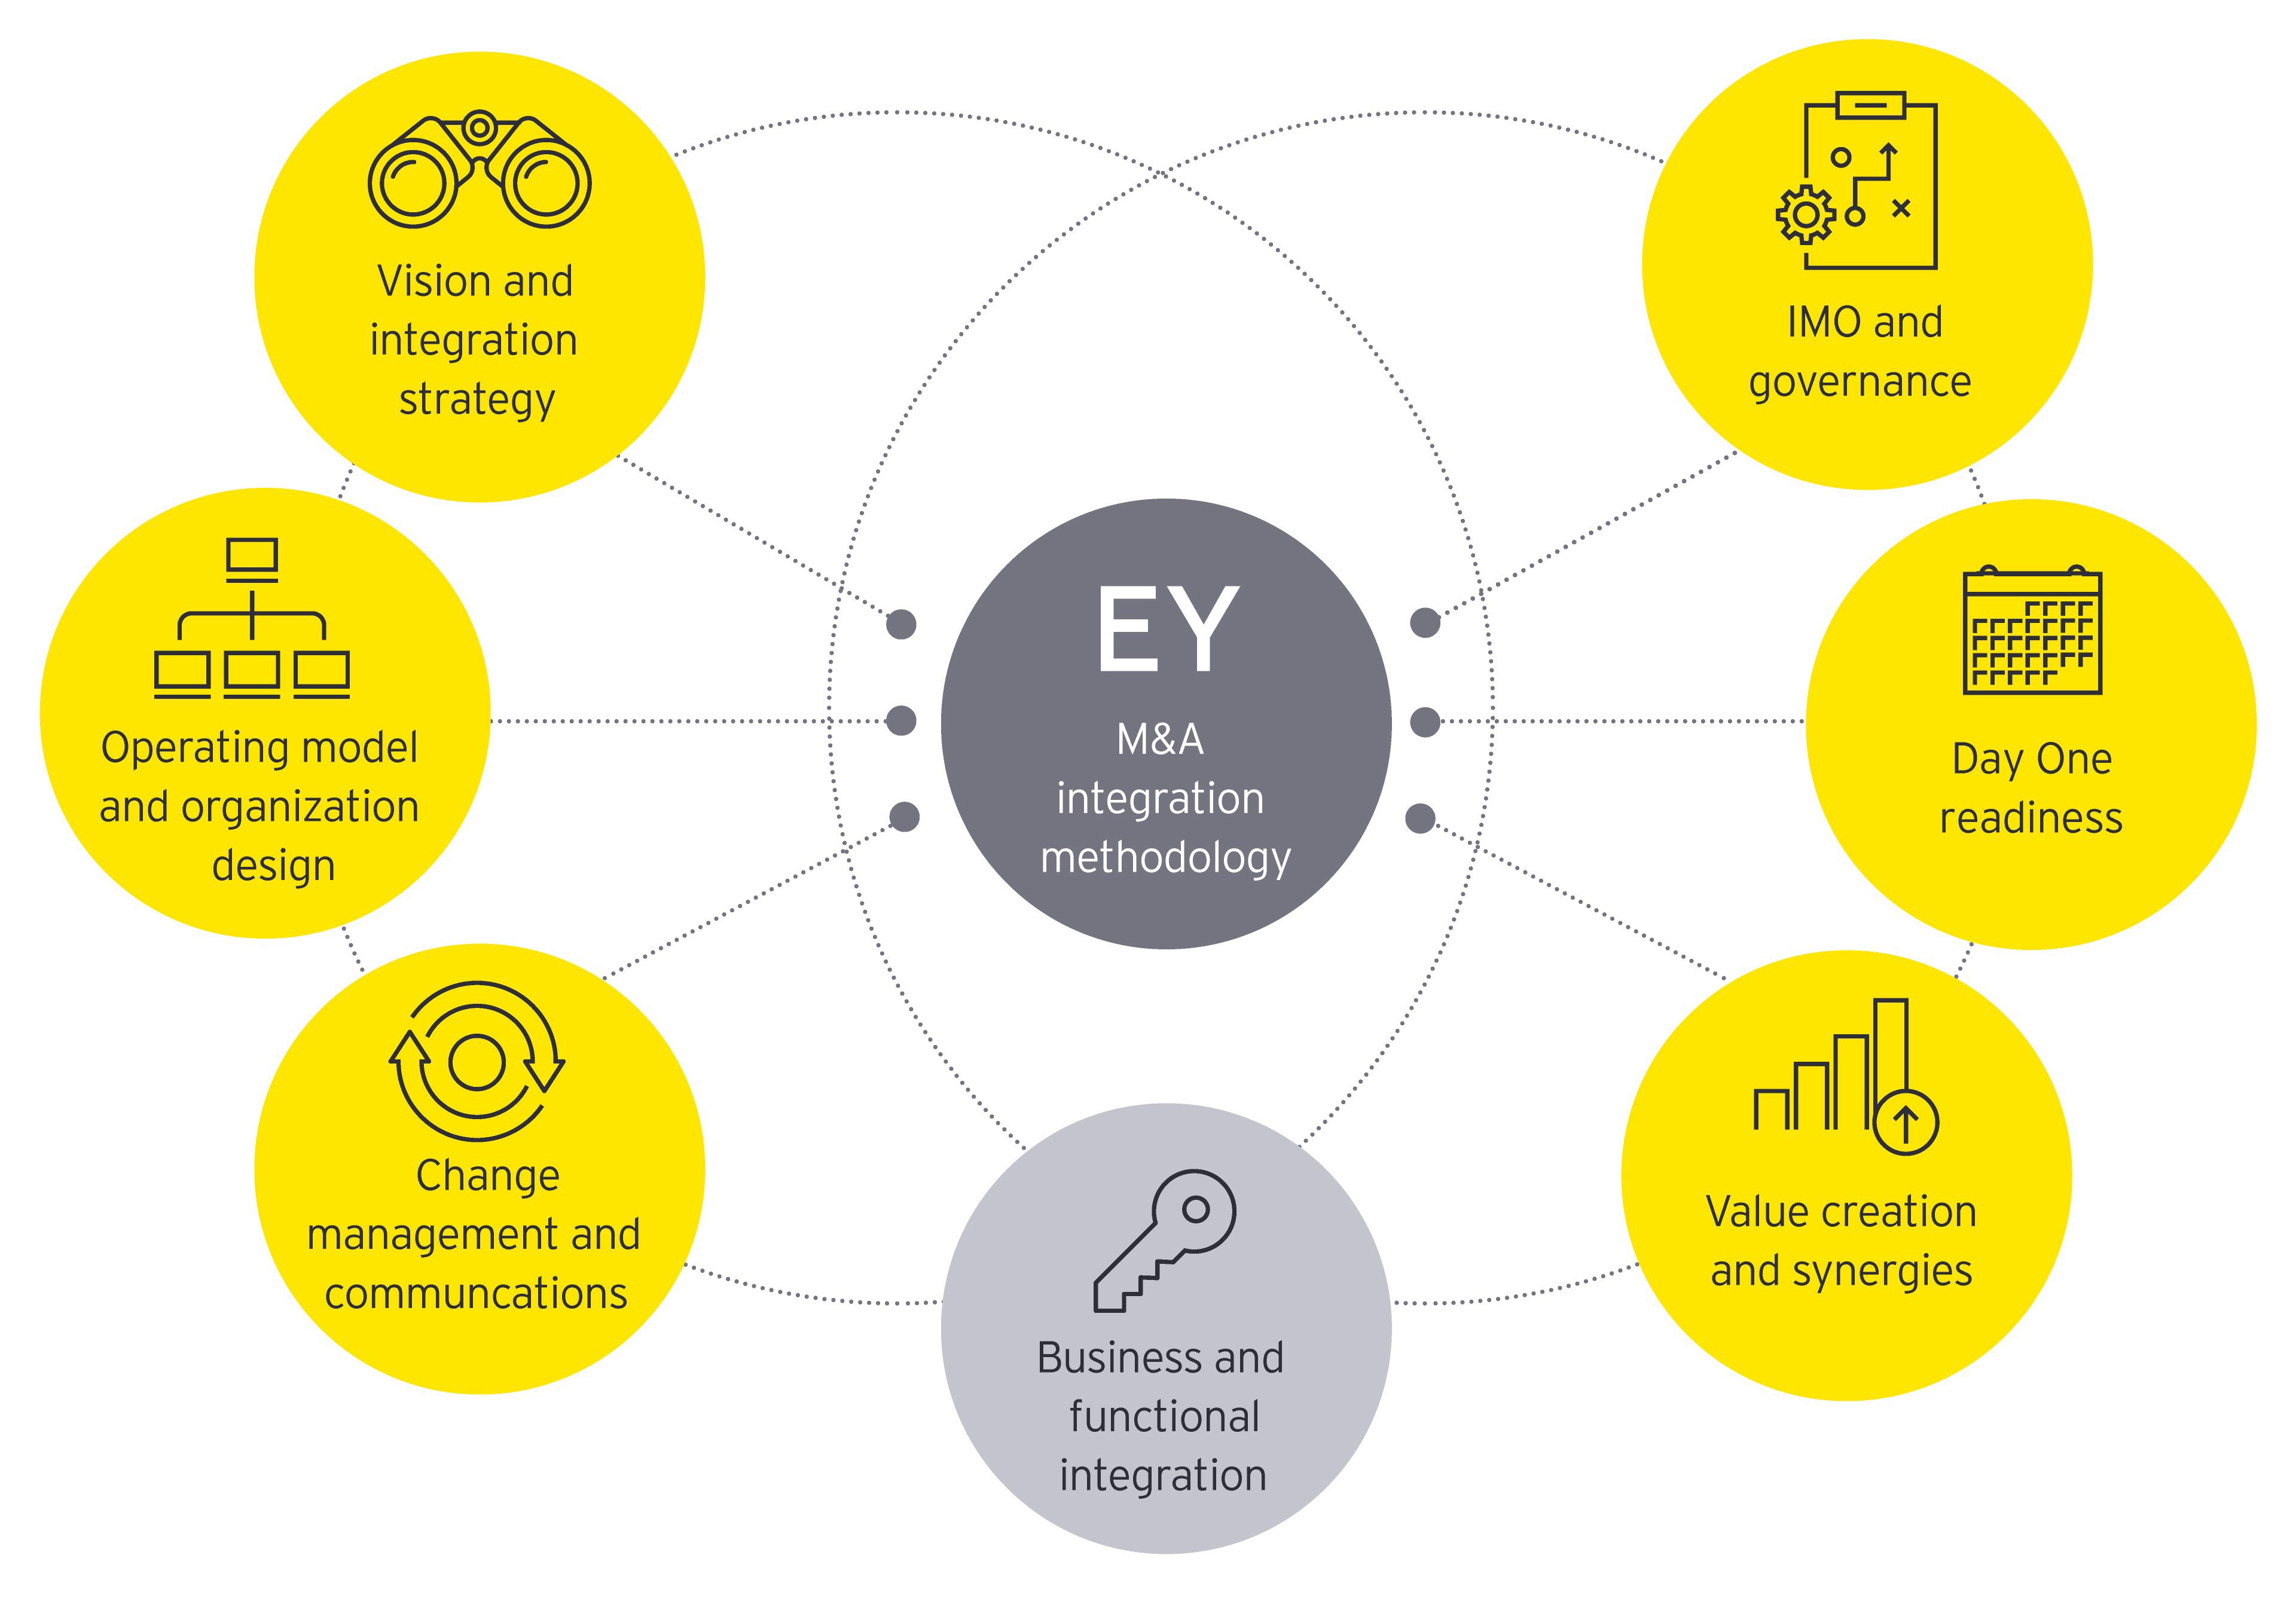 EY mergers & acquisitions integration methodology